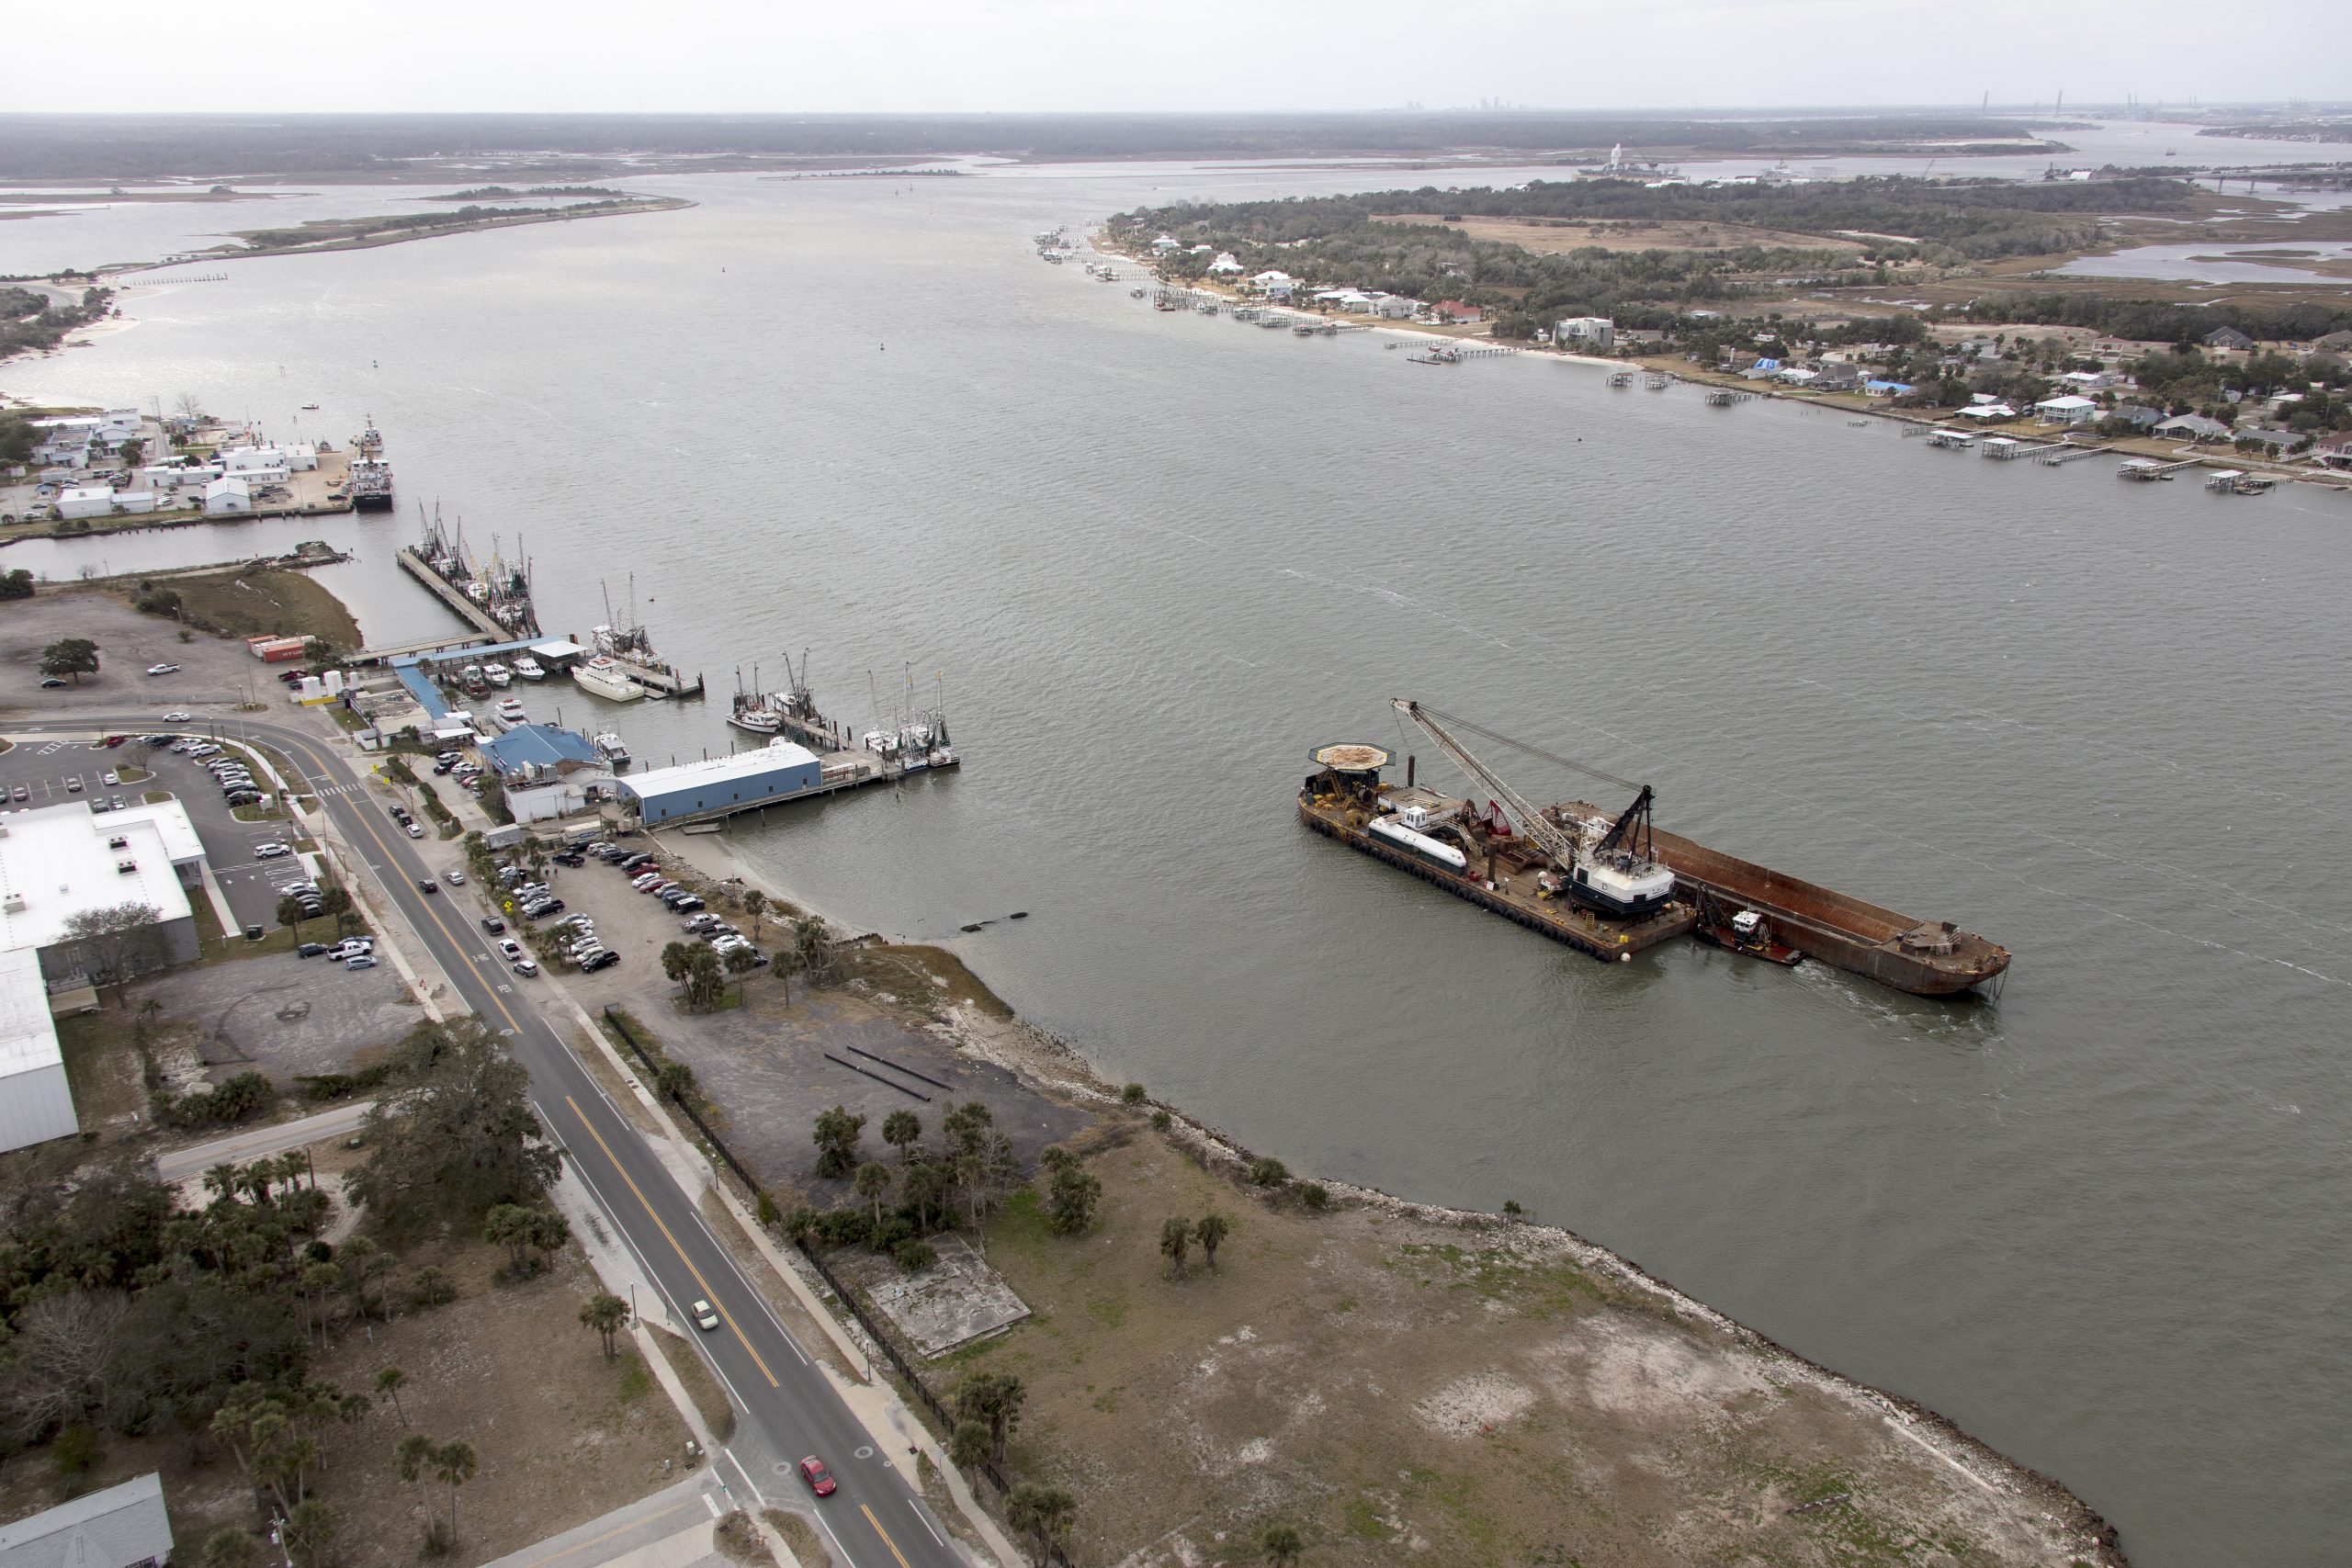 The Jacksonville Harbor Deepening project, which will bring the federal shipping channel in the St. Johns River to a depth of 47 feet, is started by the Dutra Group, contractors for the US Army Corps of Engineers.